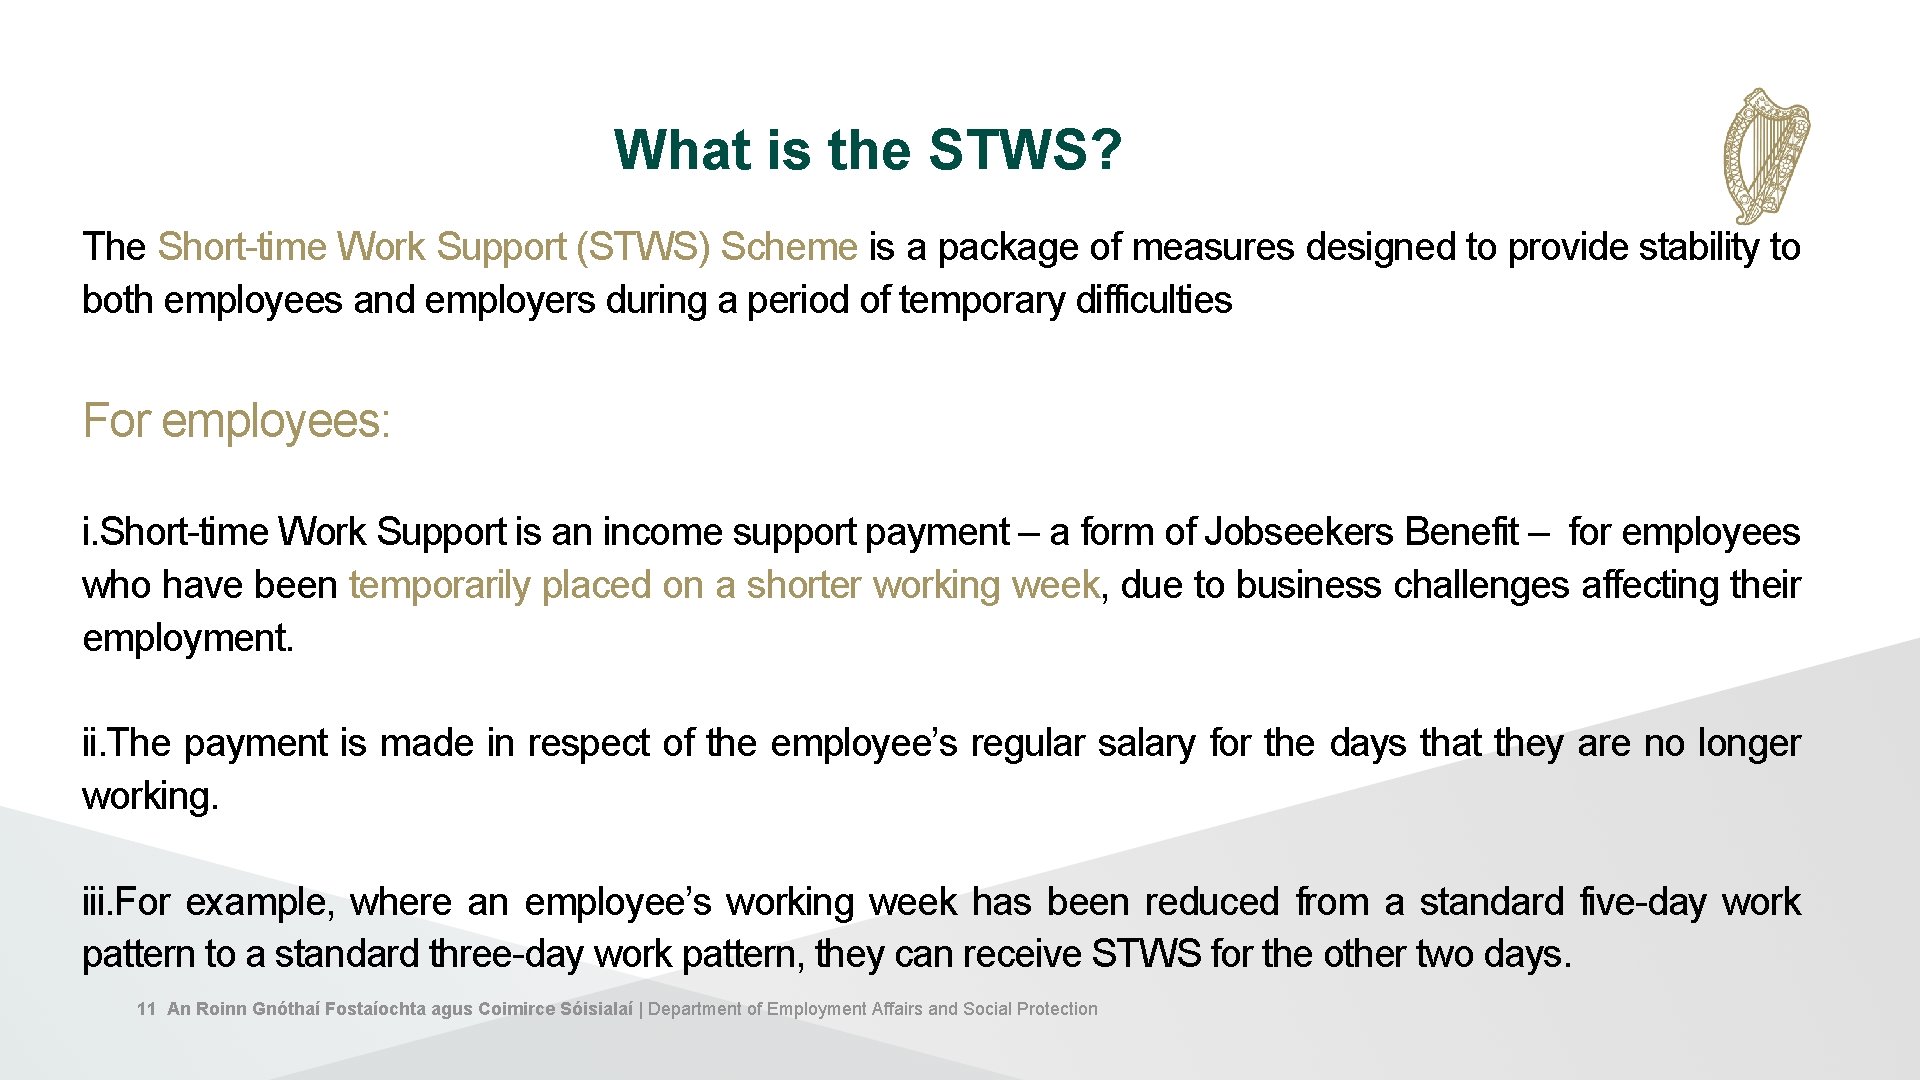 What is the STWS? The Short-time Work Support (STWS) Scheme is a package of